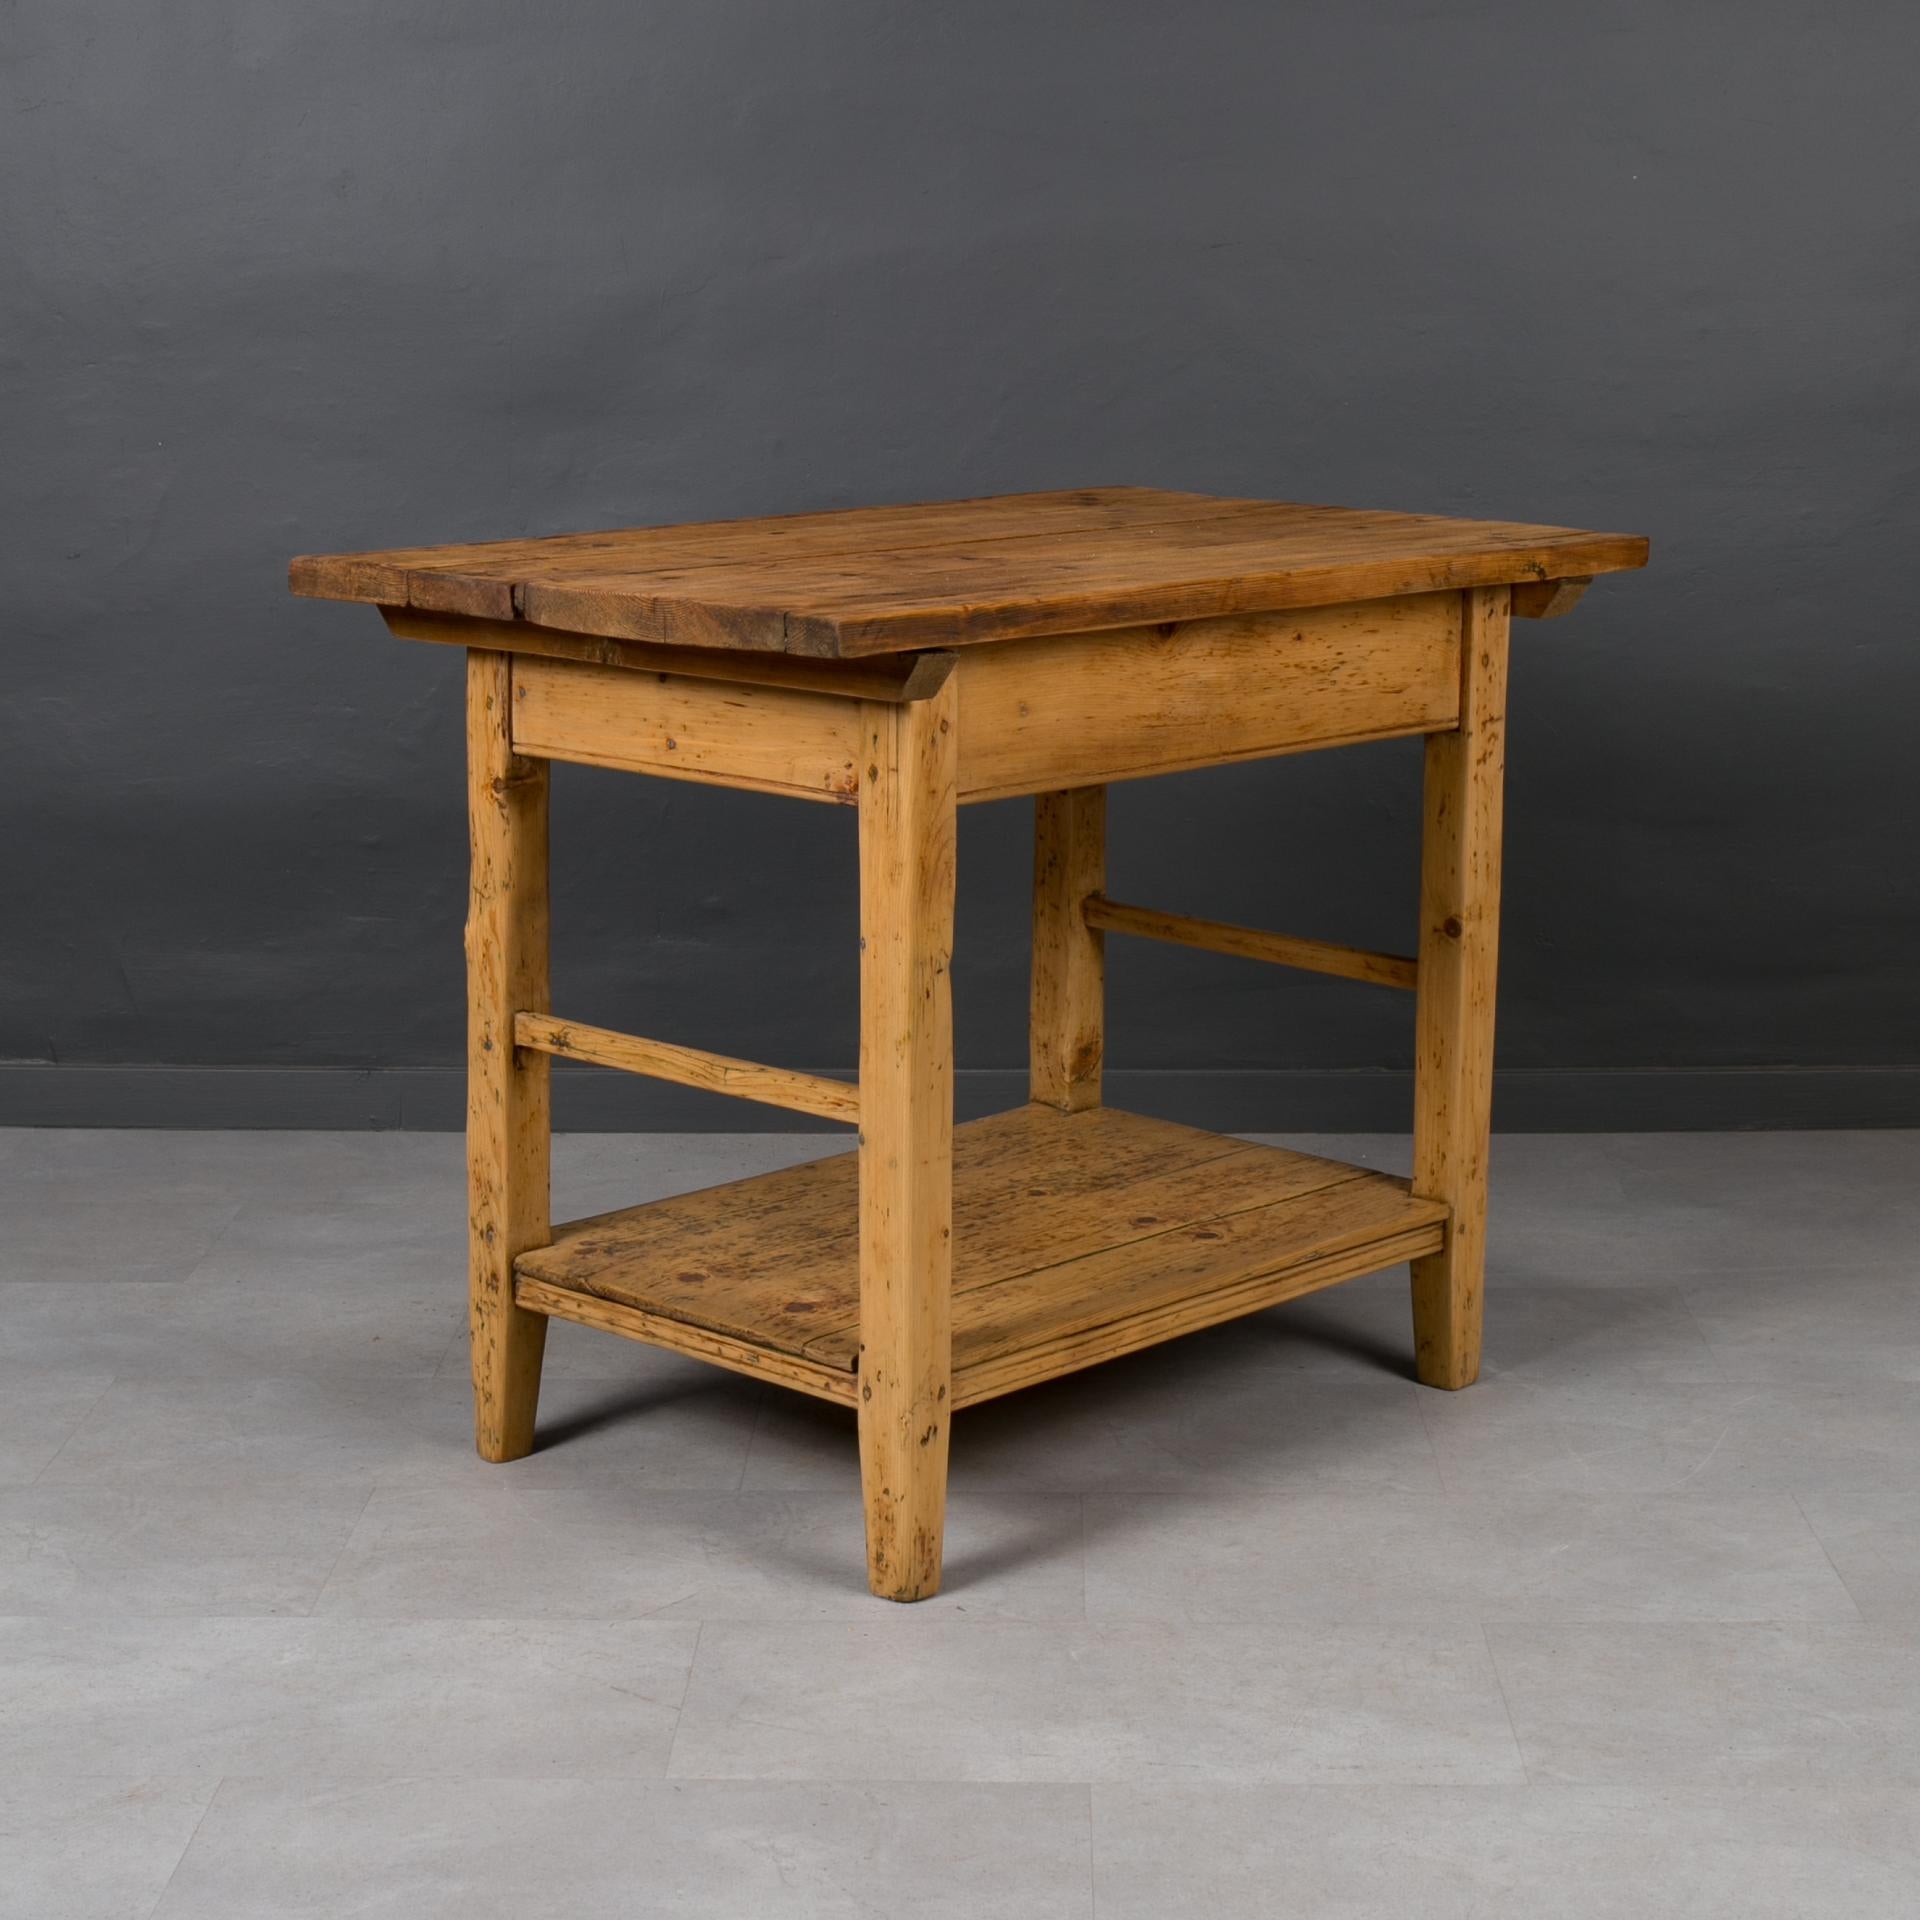 Oiled Vintage Pine Wood Table, Rustic Style, Prep or Dining Table, Kitchen Island For Sale